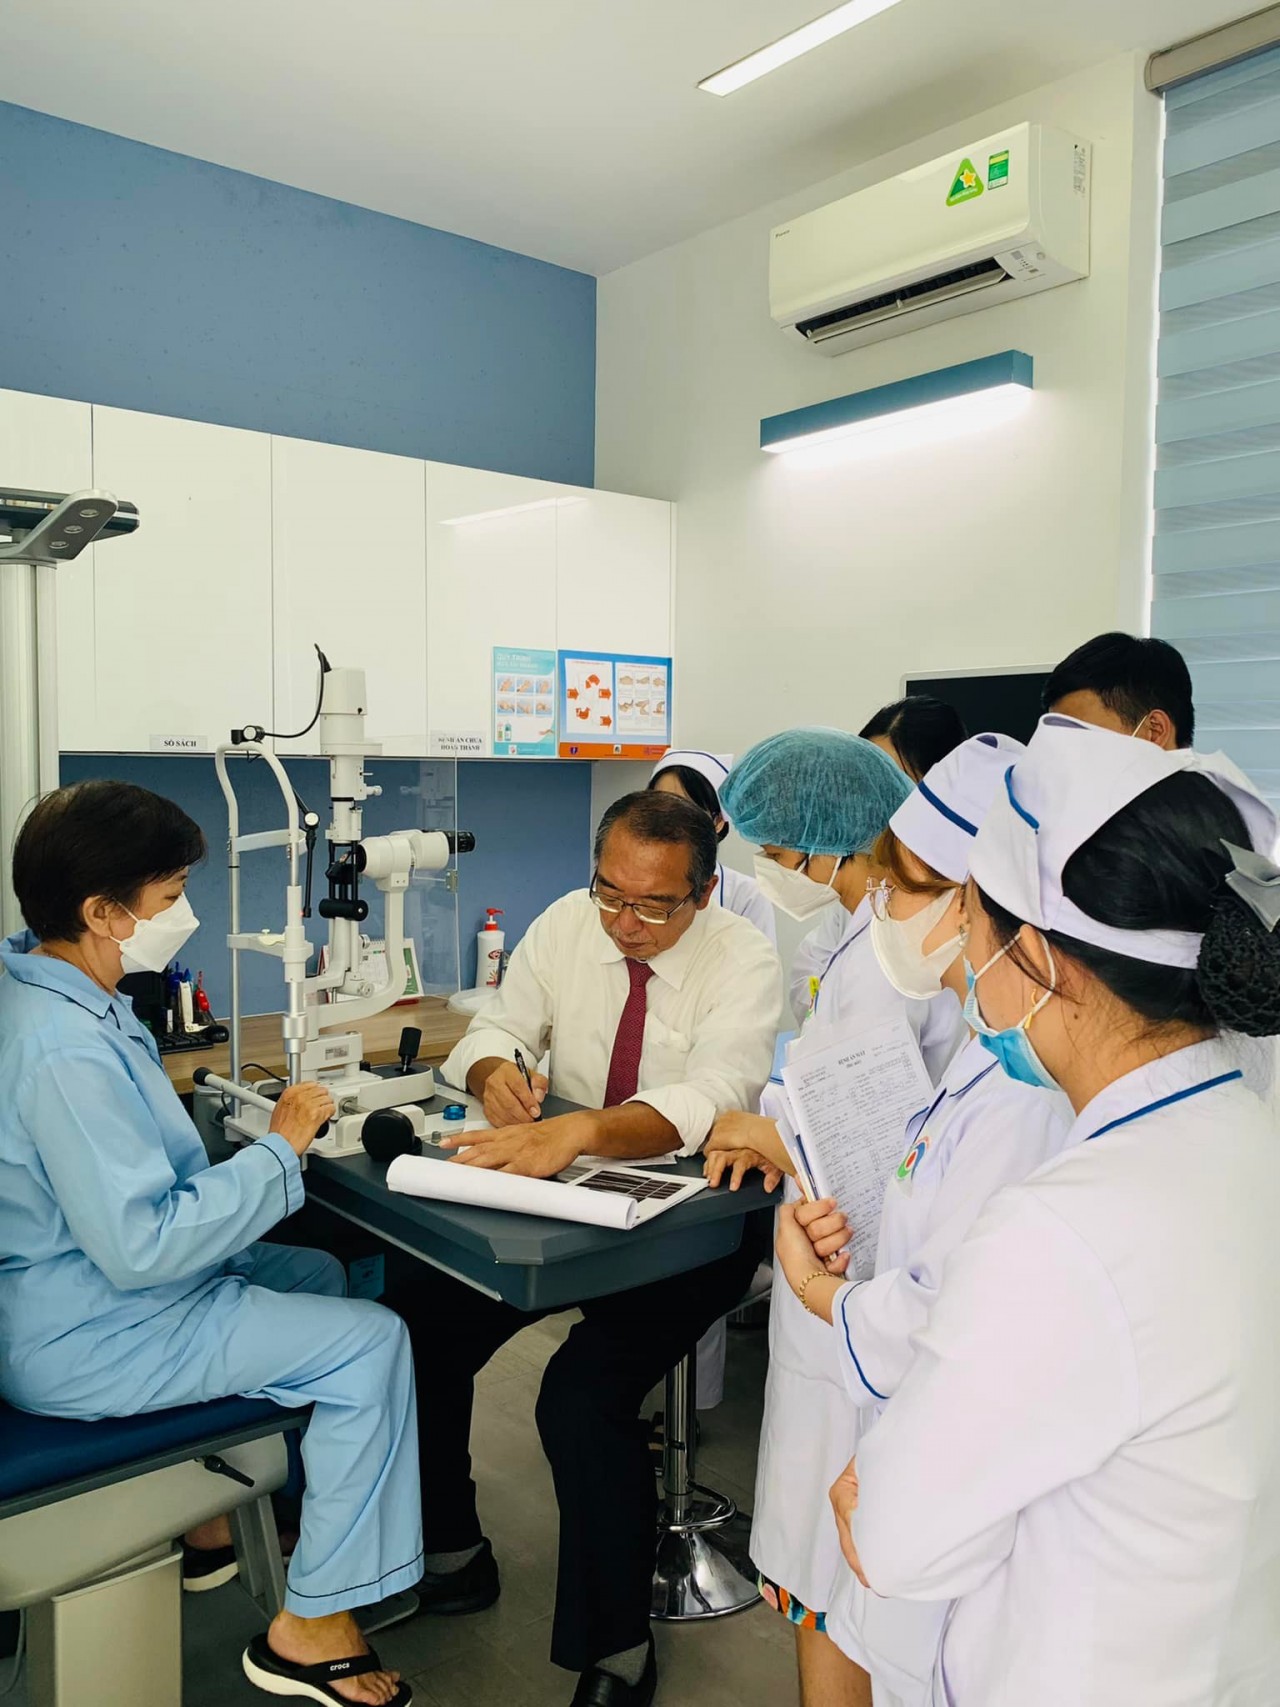 Some Ten Thousands Vietnam's Visually Impaired Saved by Japanese Doctor